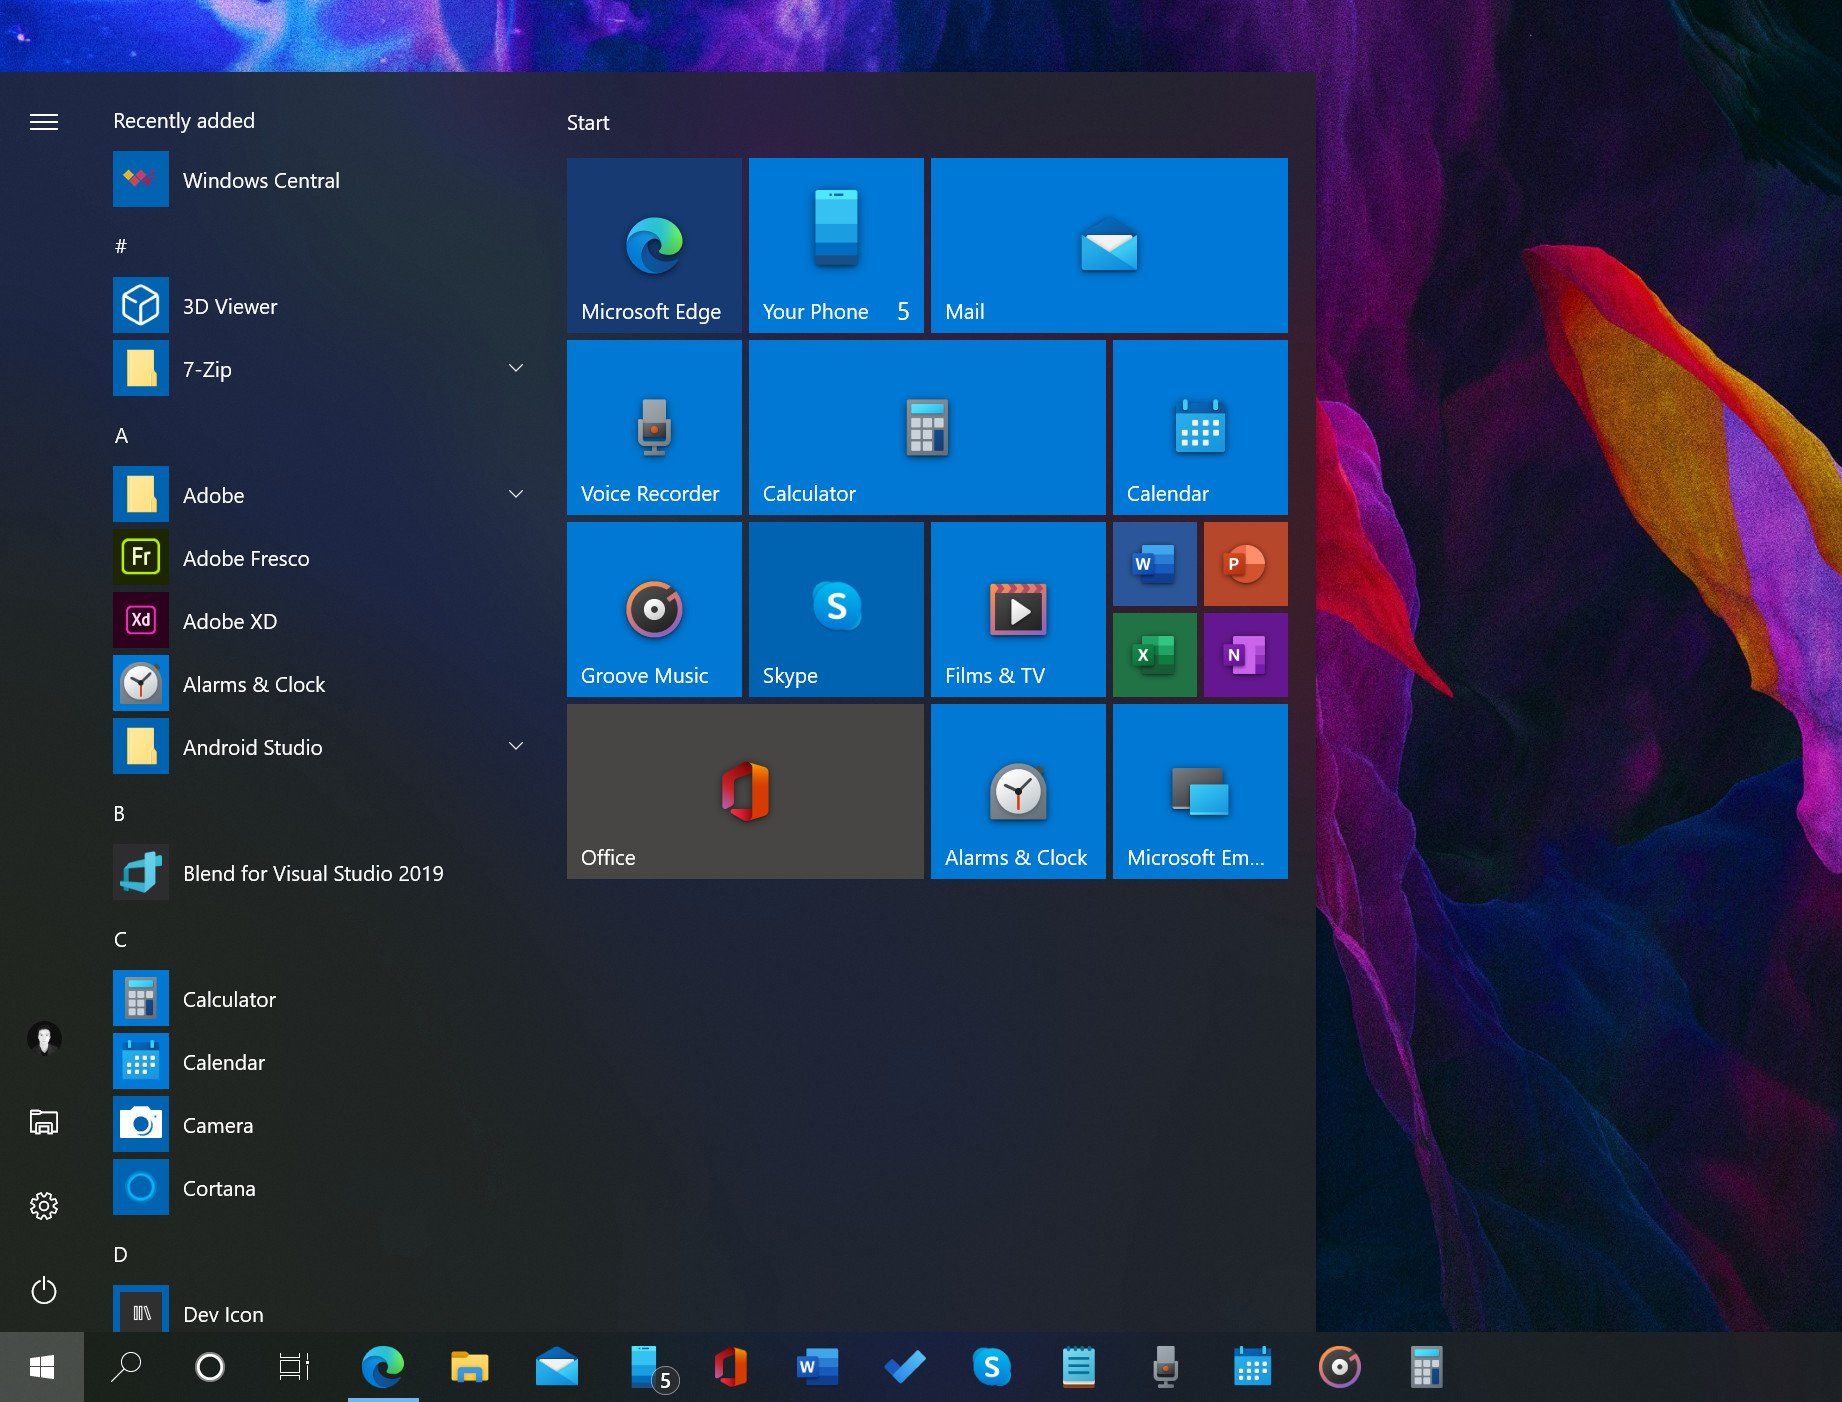 Windows 10's new Mail and Calendar icons now rolling out to the public